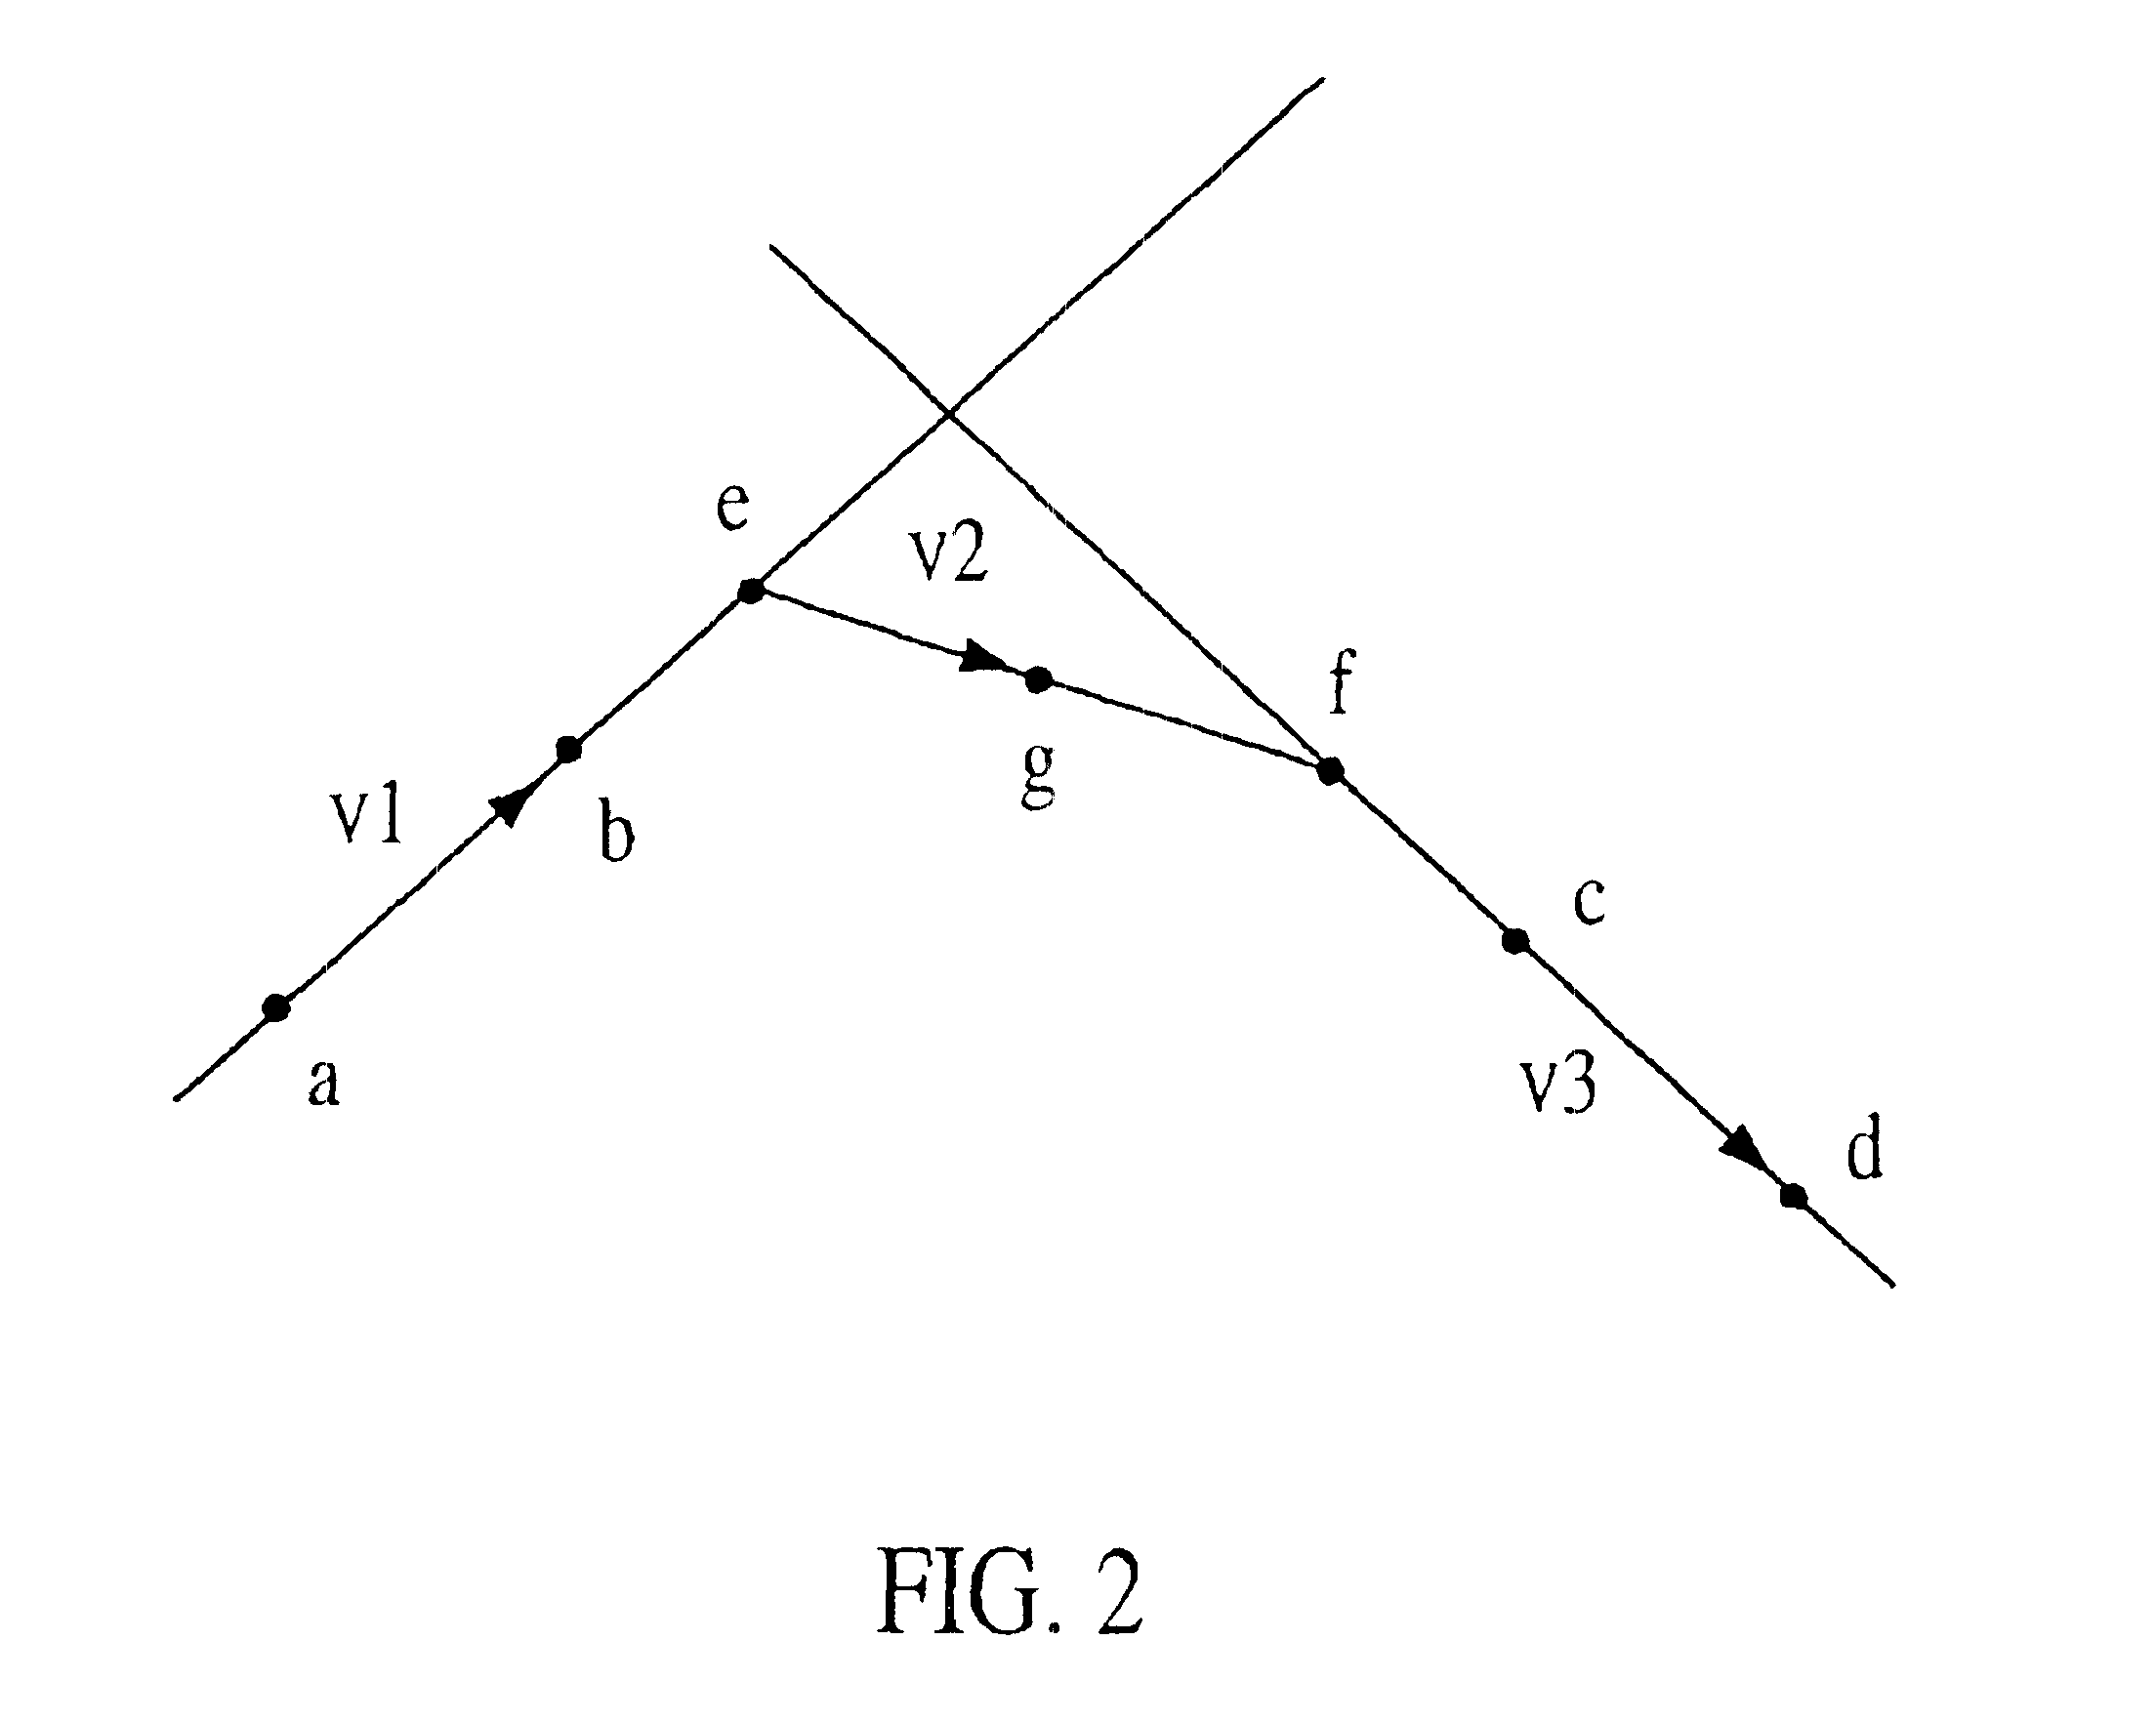 Versatile stereotactic device and methods of use